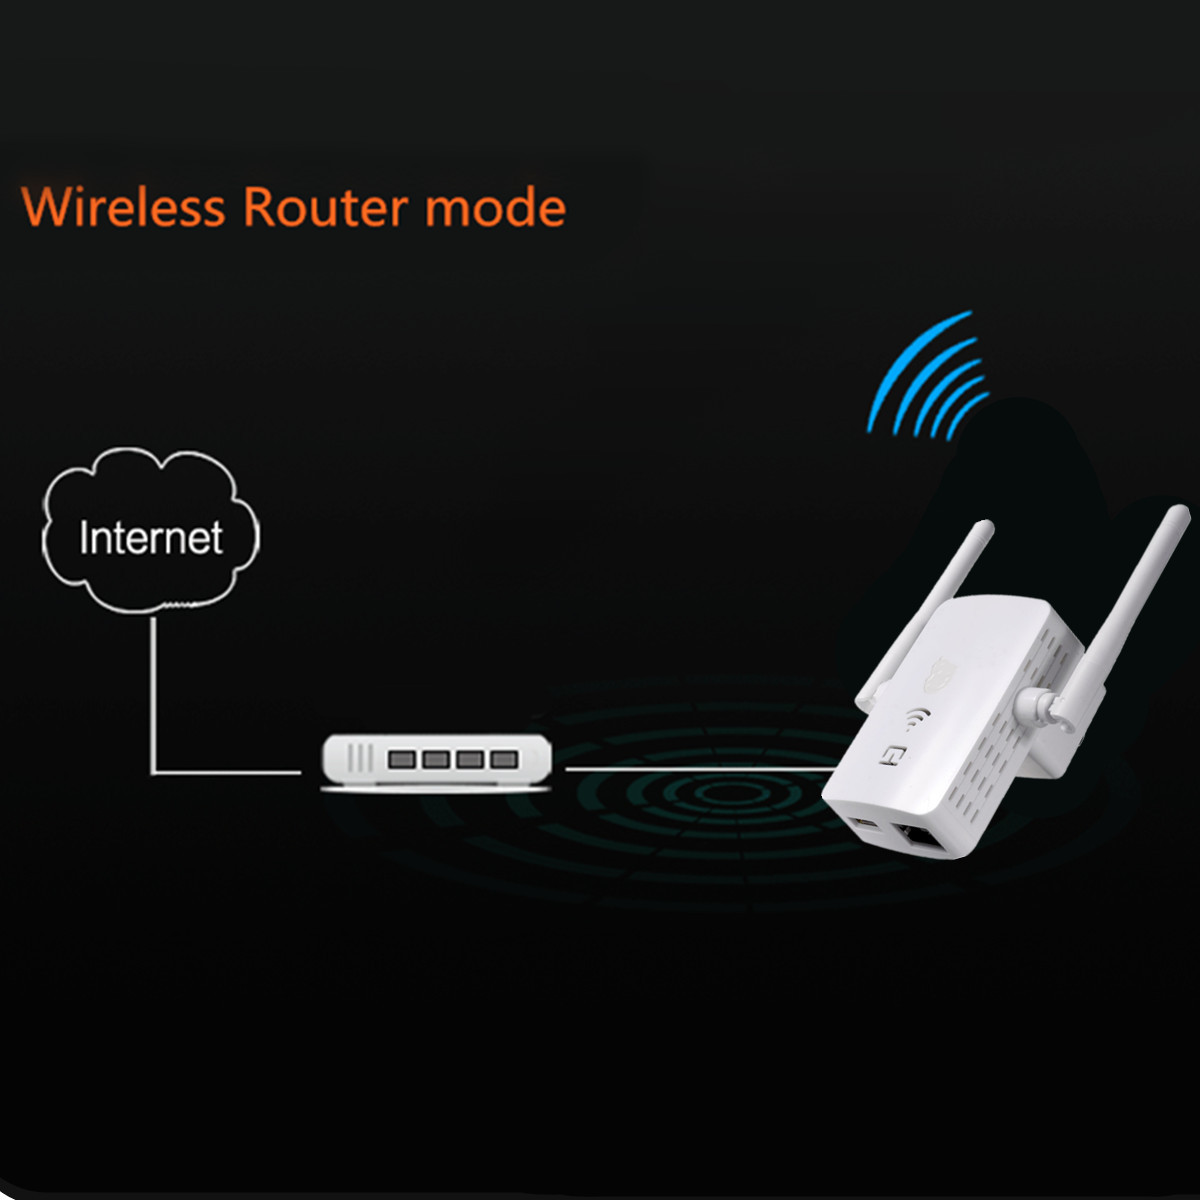 150Mbps-Wireless-WiFi-Range-Extender-Signal-Booster-Router-Repeater-Dual-Antenna-with-LAN-USB-Port-1119784-7